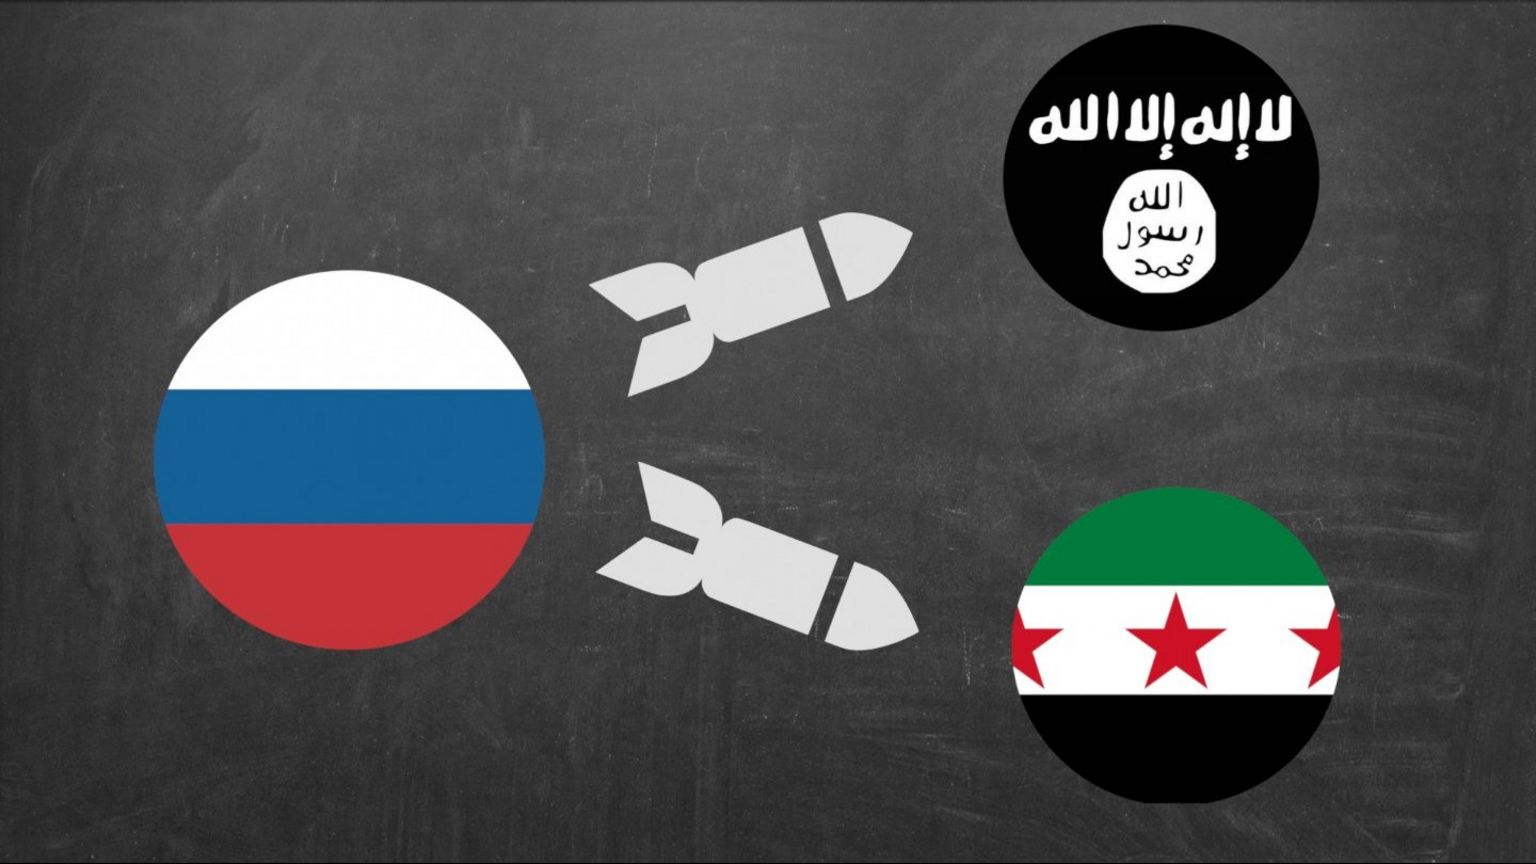 Graphic showing Russian flag and bombs against Islamic State flag and Syrian rebel flag